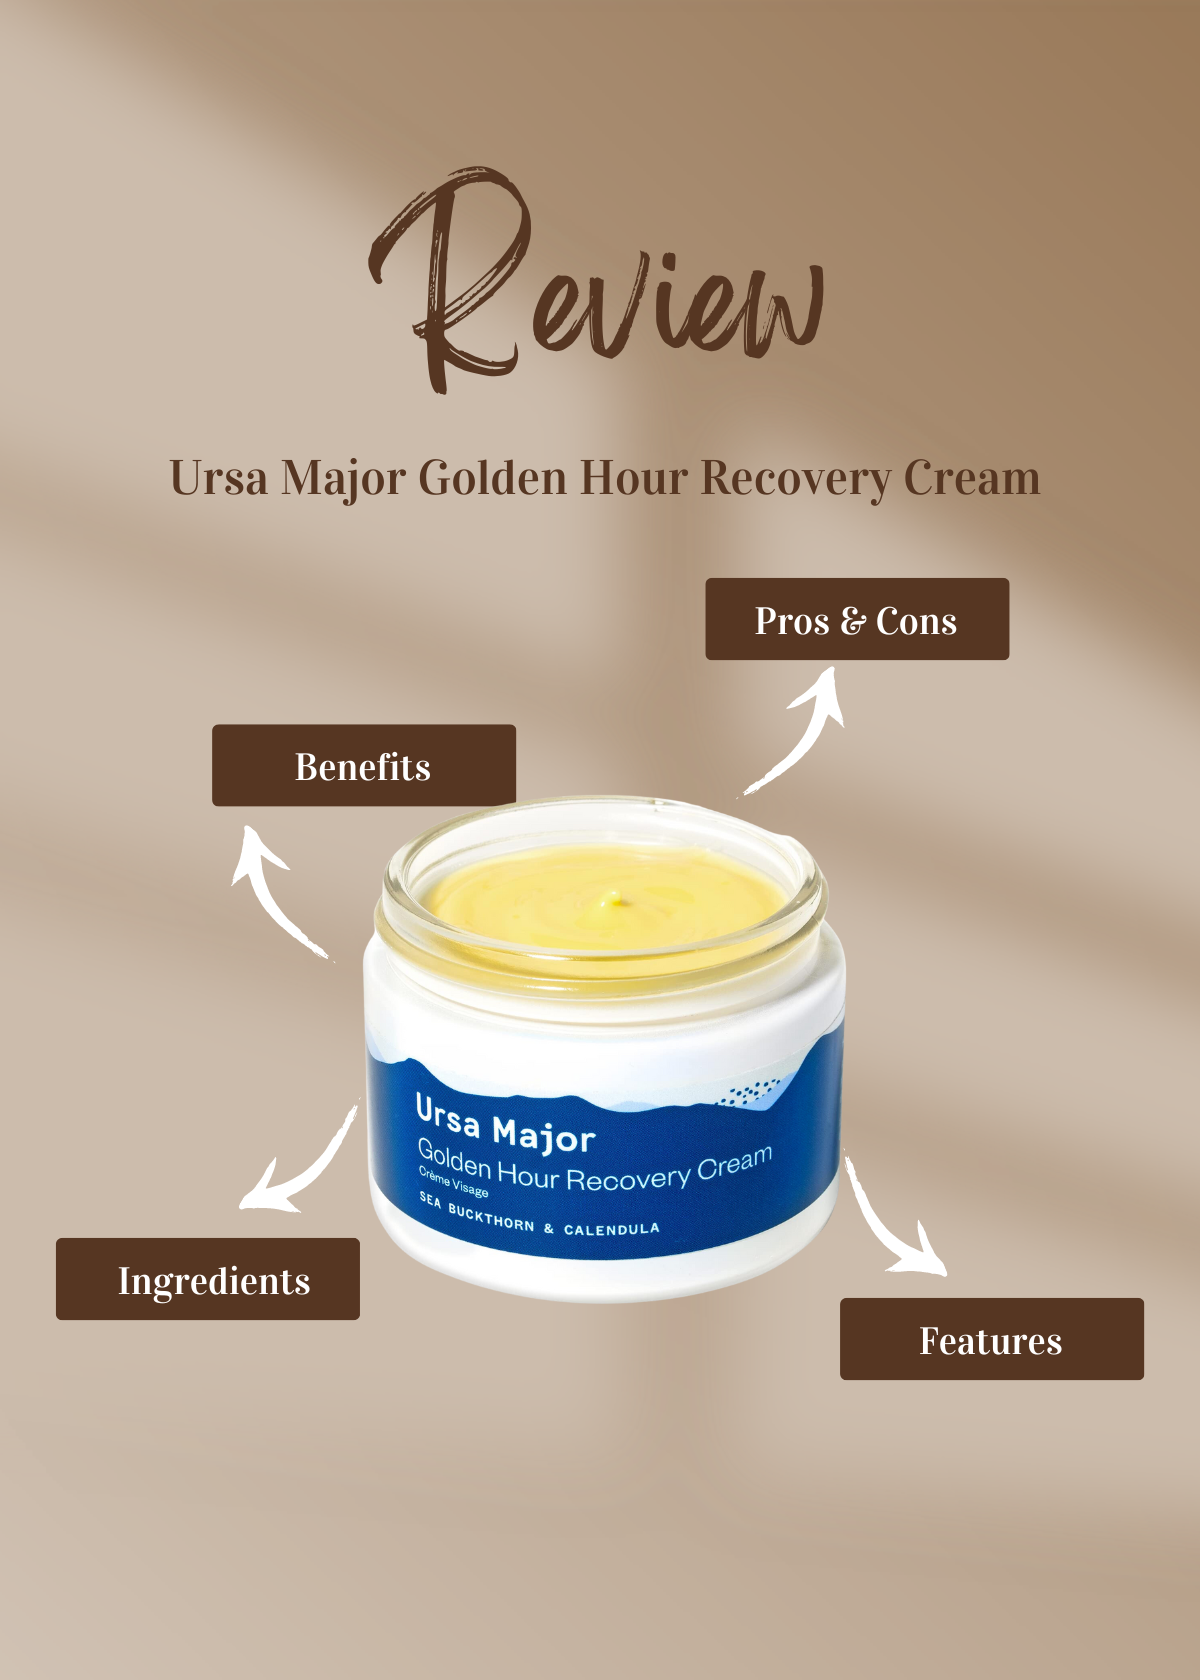 Ursa Major Golden Hour Recovery Cream Review: Is It Worth It?